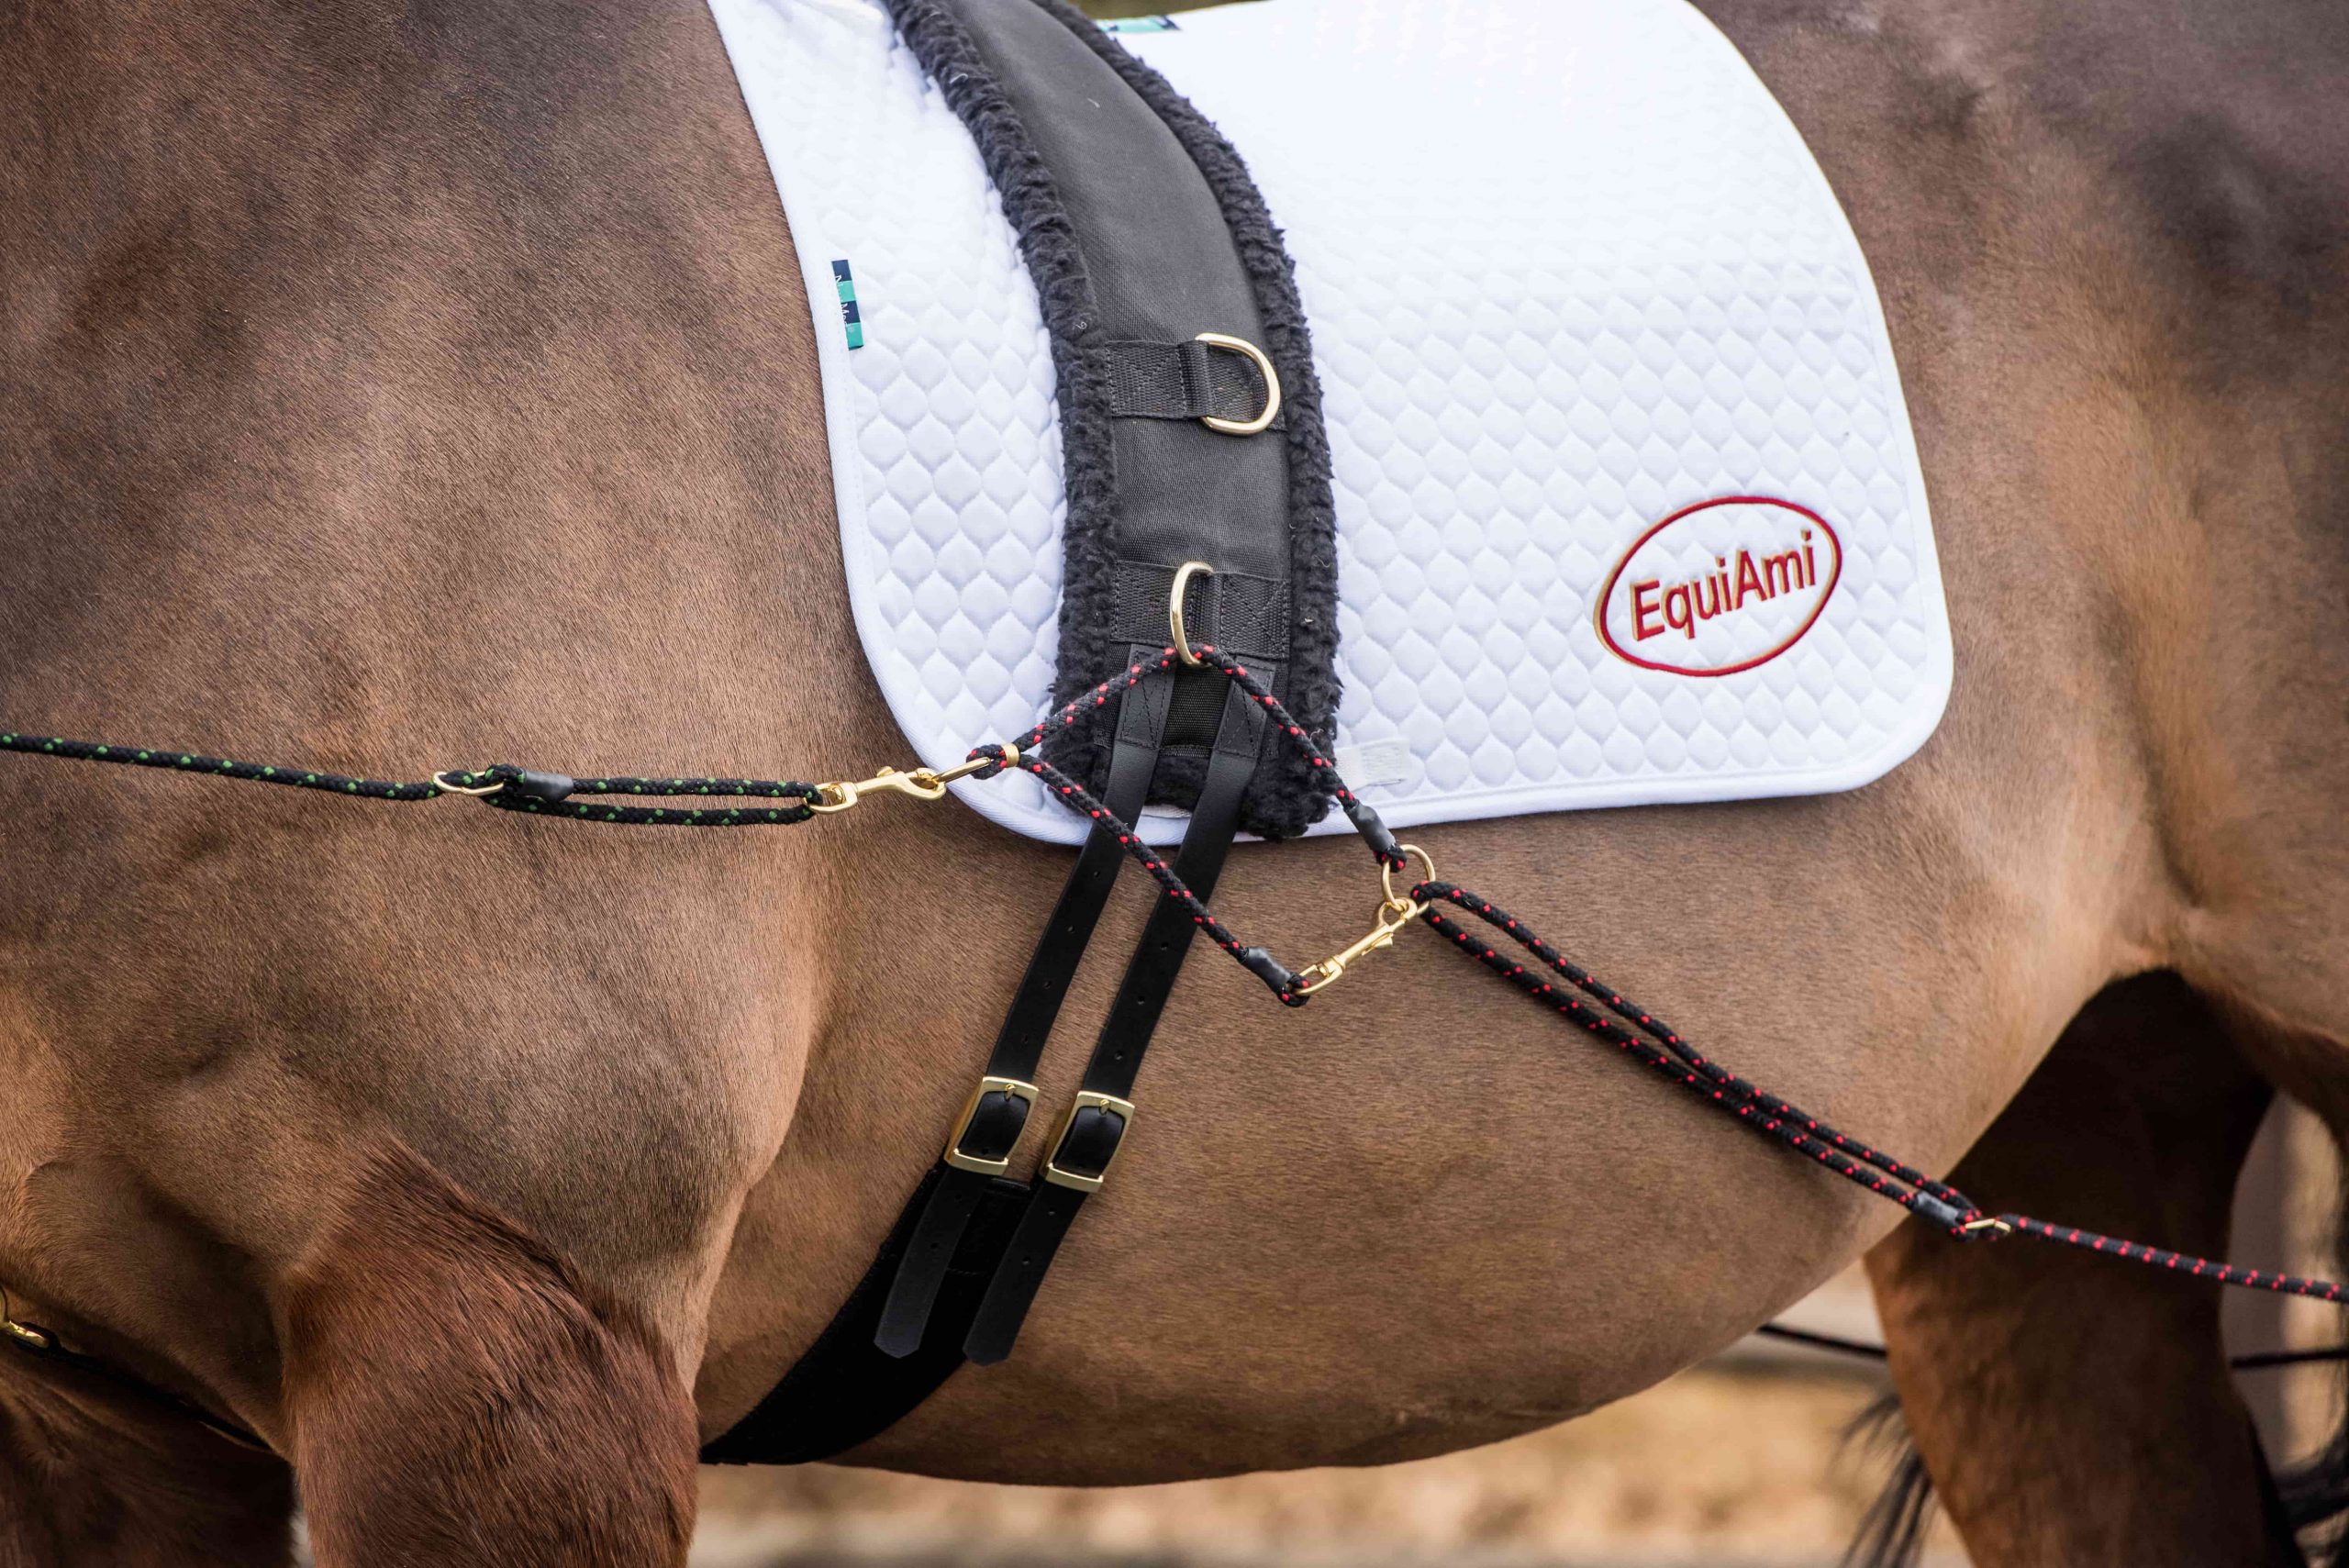 How the EquiAmi can help with the effective rehabilitation of horses